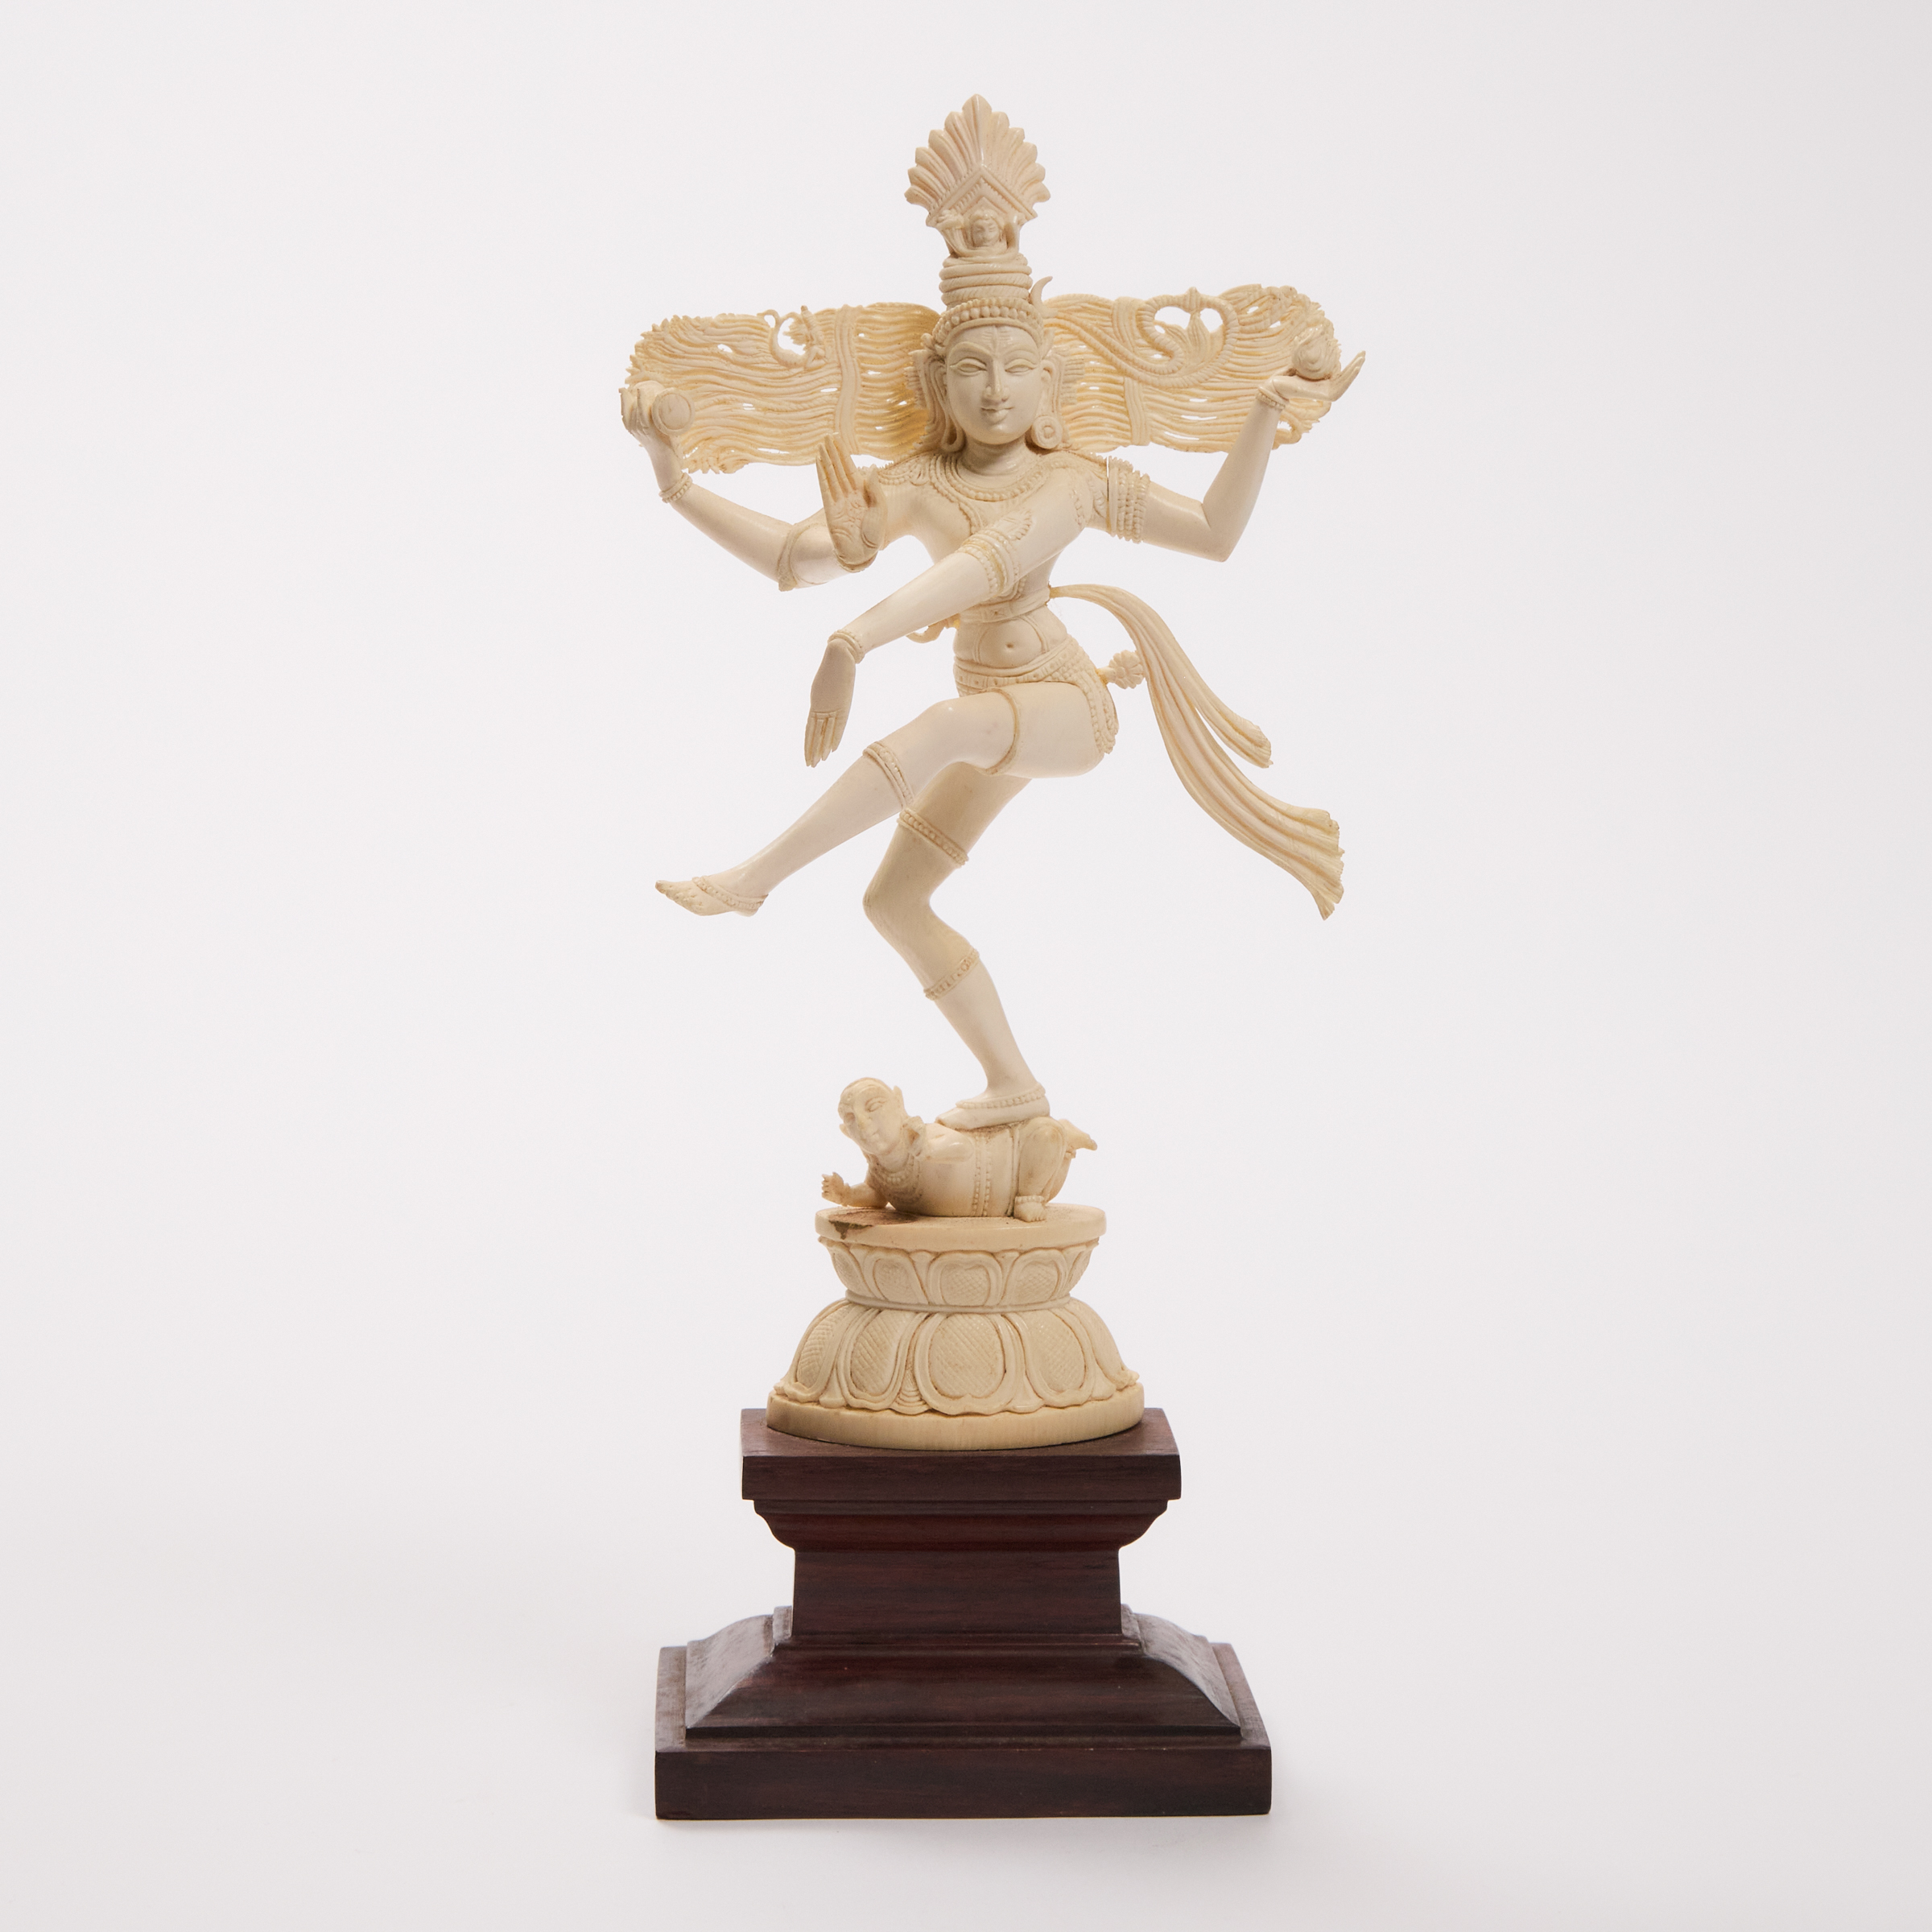 An Indian Ivory Figure of Shiva